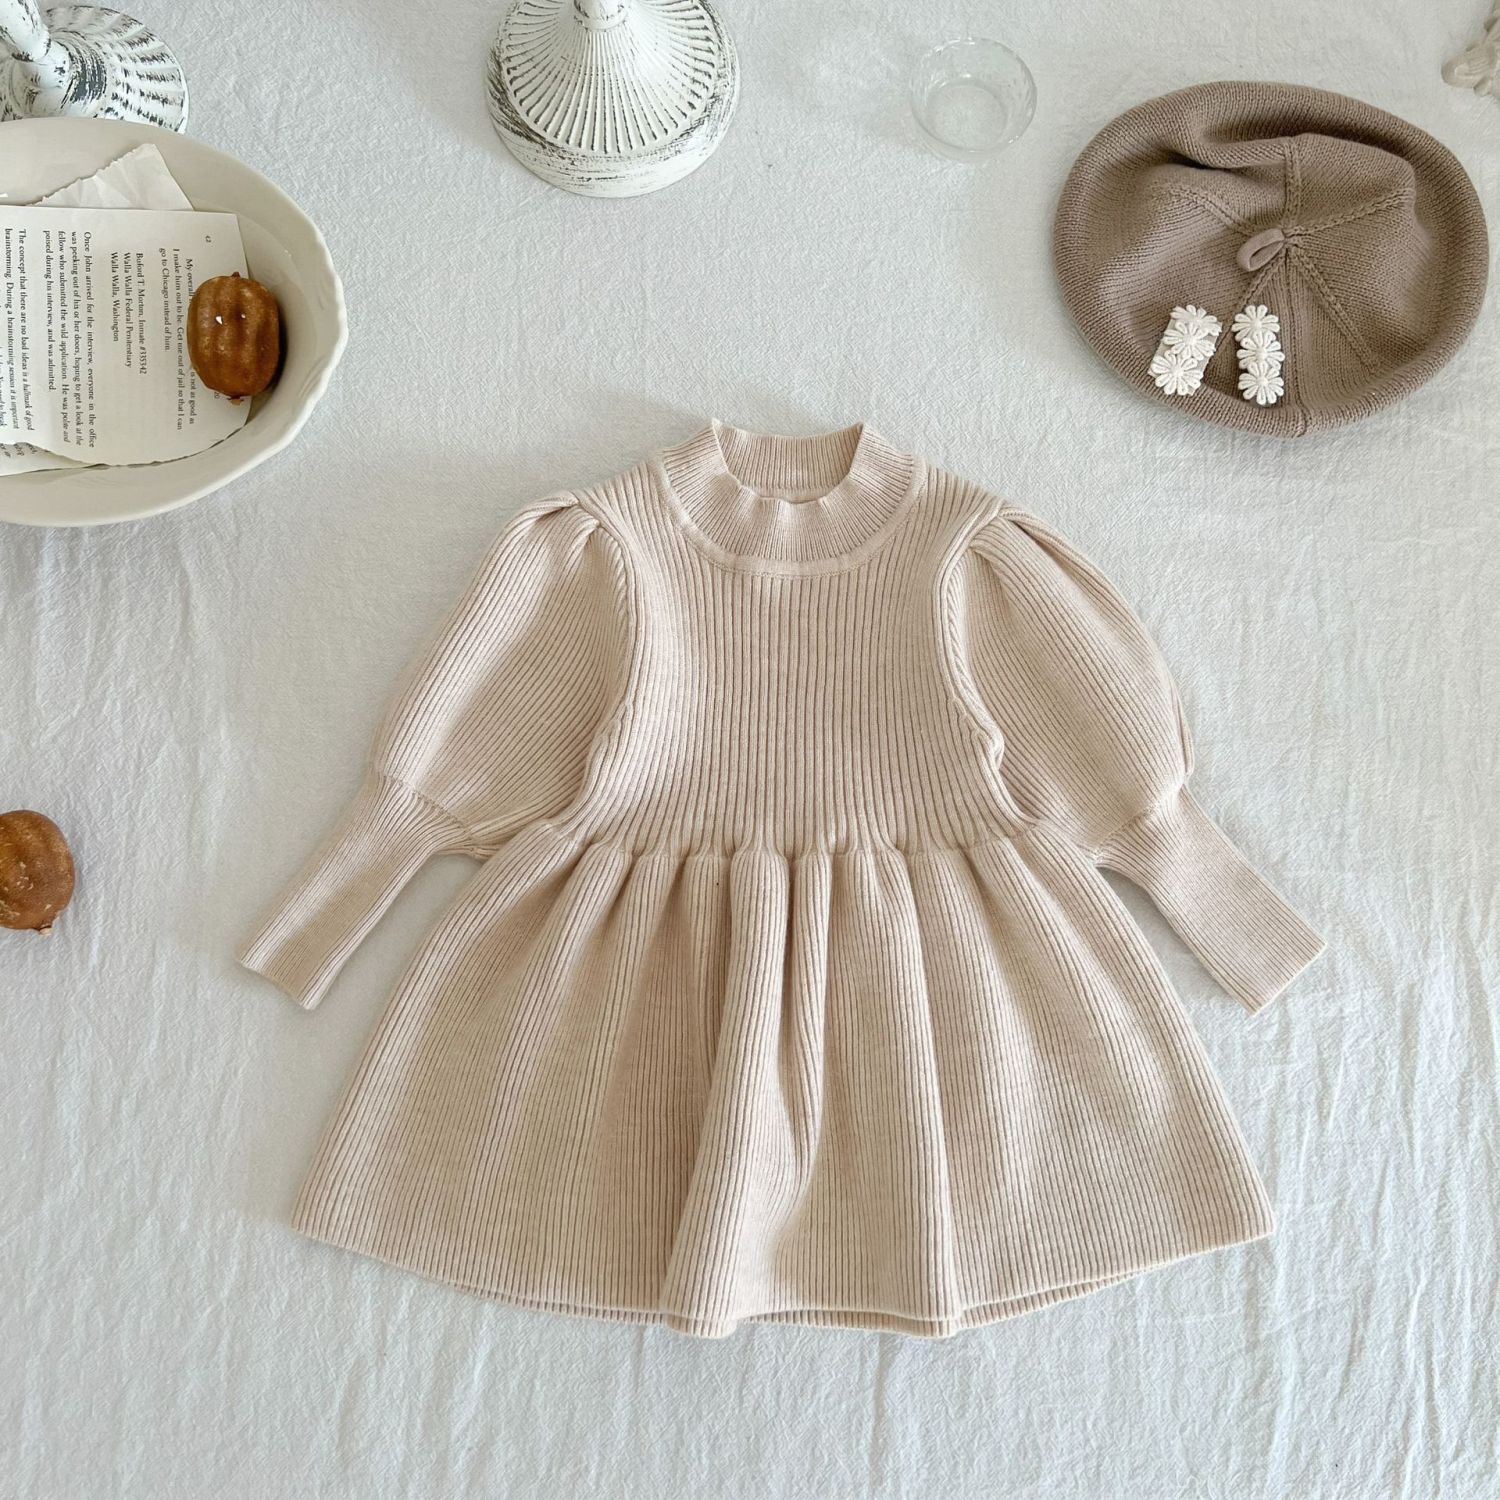 Korean autumn and winter girls knitted dress foreign style princess knitted sweater dress baby baby long-sleeved dress